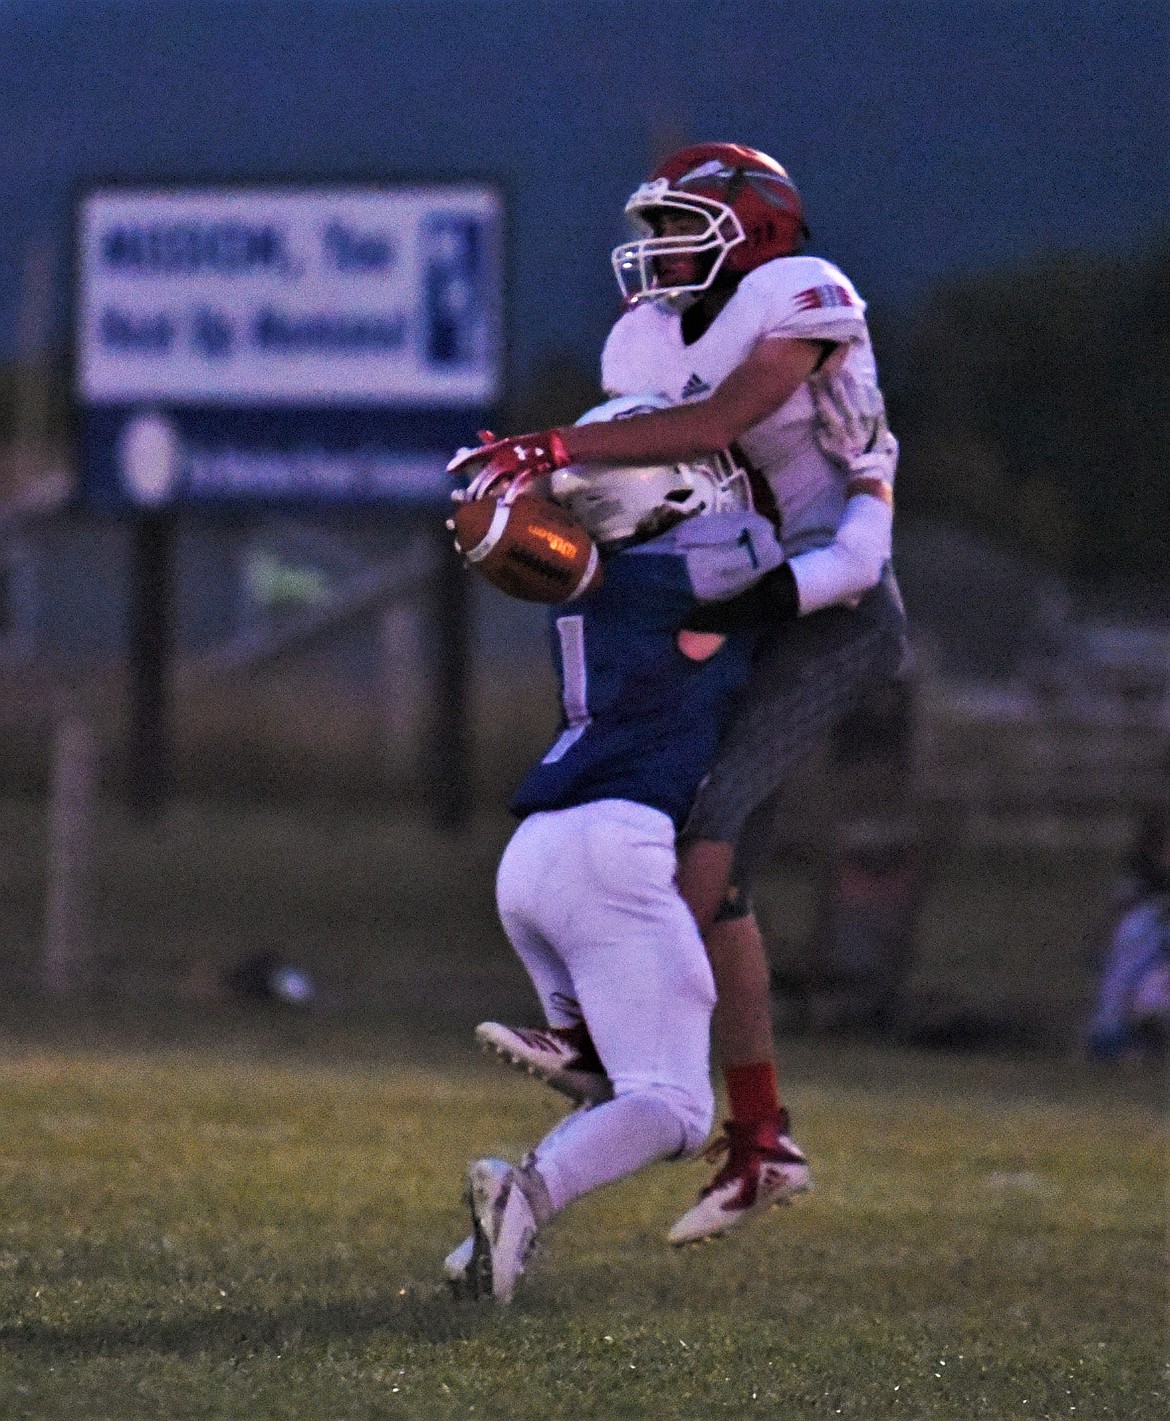 Mission sophomore Bryce Umphrey breaks up a pass intended for Warriors freshman Kendall O'Neill. (Scot Heisel/Lake County Leader)